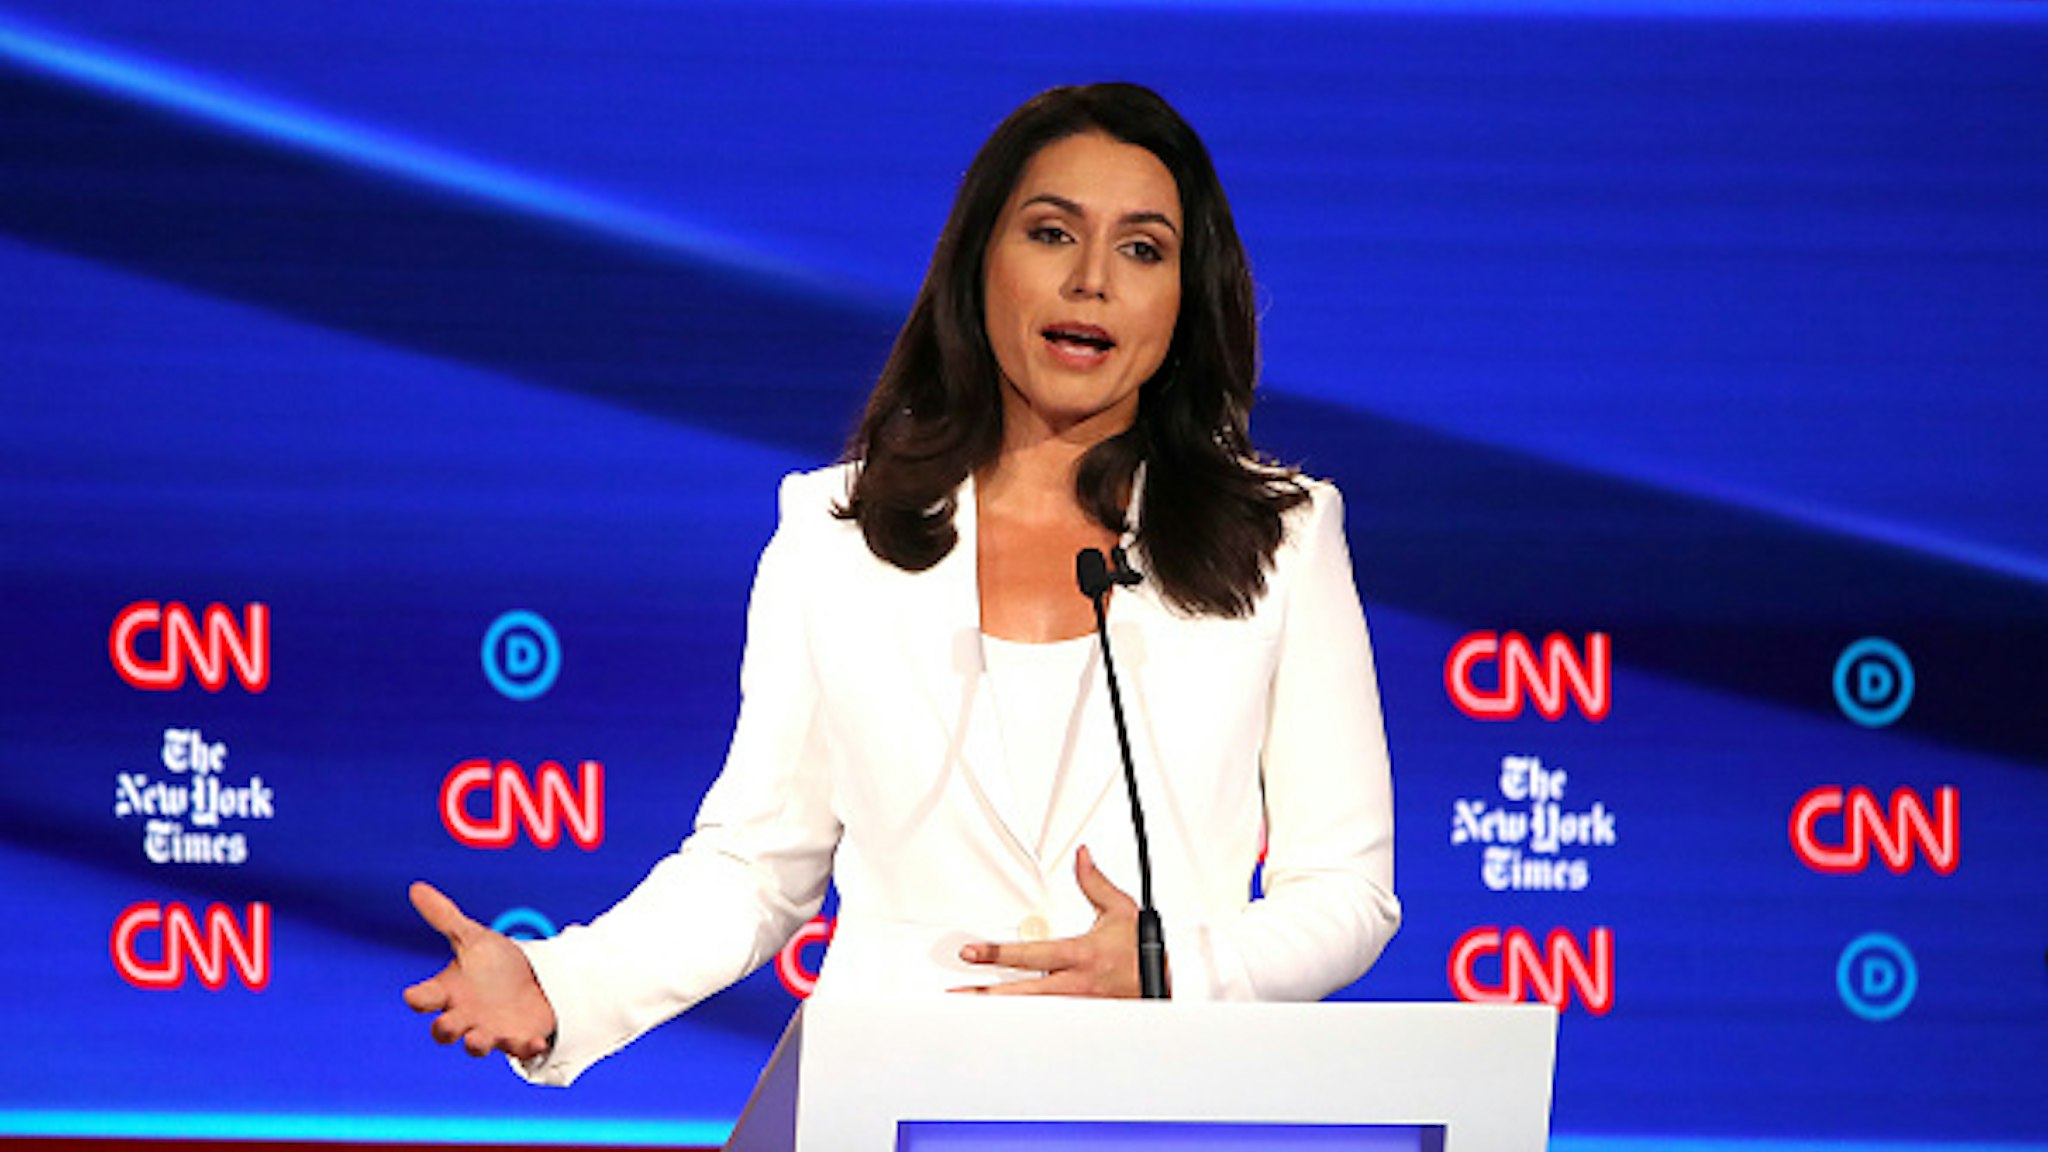 WESTERVILLE, OHIO - OCTOBER 15: Rep. Tulsi Gabbard (D-HI) speaks during the Democratic Presidential Debate at Otterbein University on October 15, 2019 in Westerville, Ohio. A record 12 presidential hopefuls are participating in the debate hosted by CNN and The New York Times.